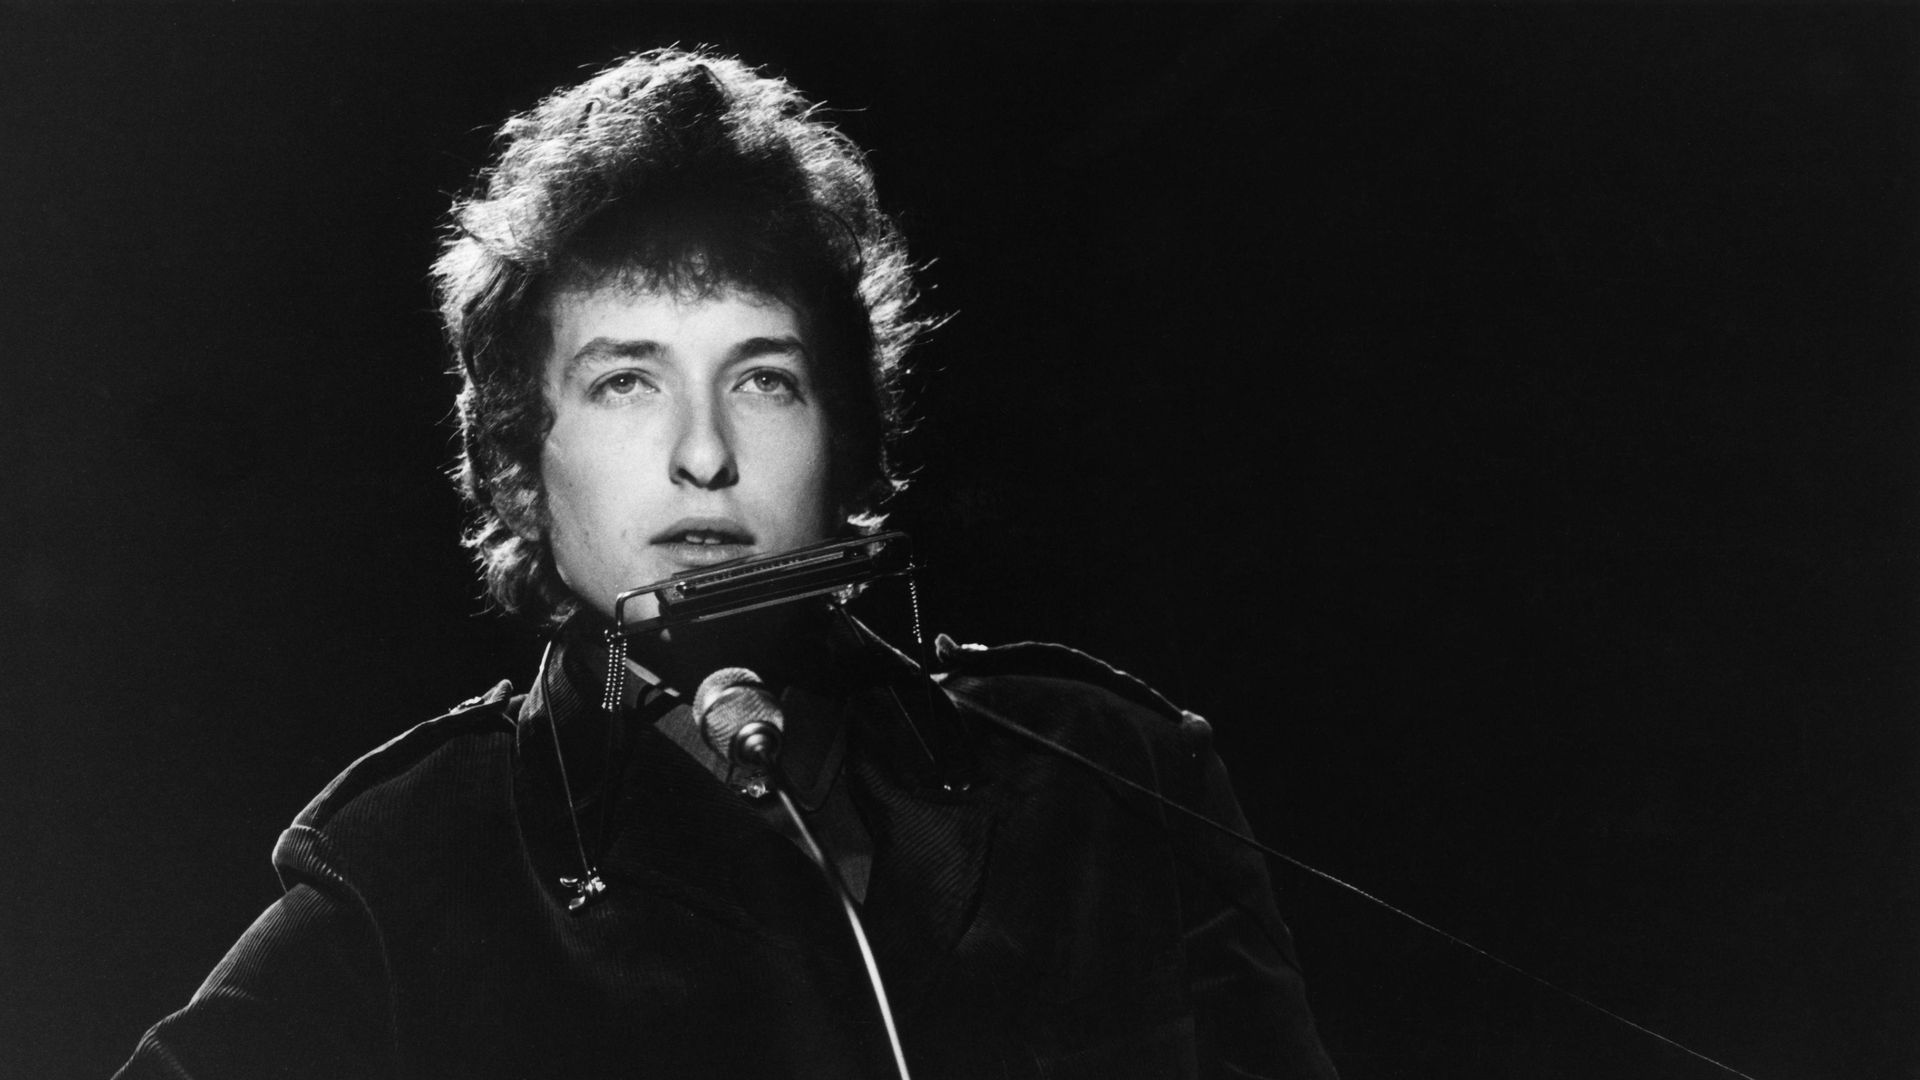 Photo of Bob DYLAN, performing on a BBC TV show in the U.K. in the 1960s